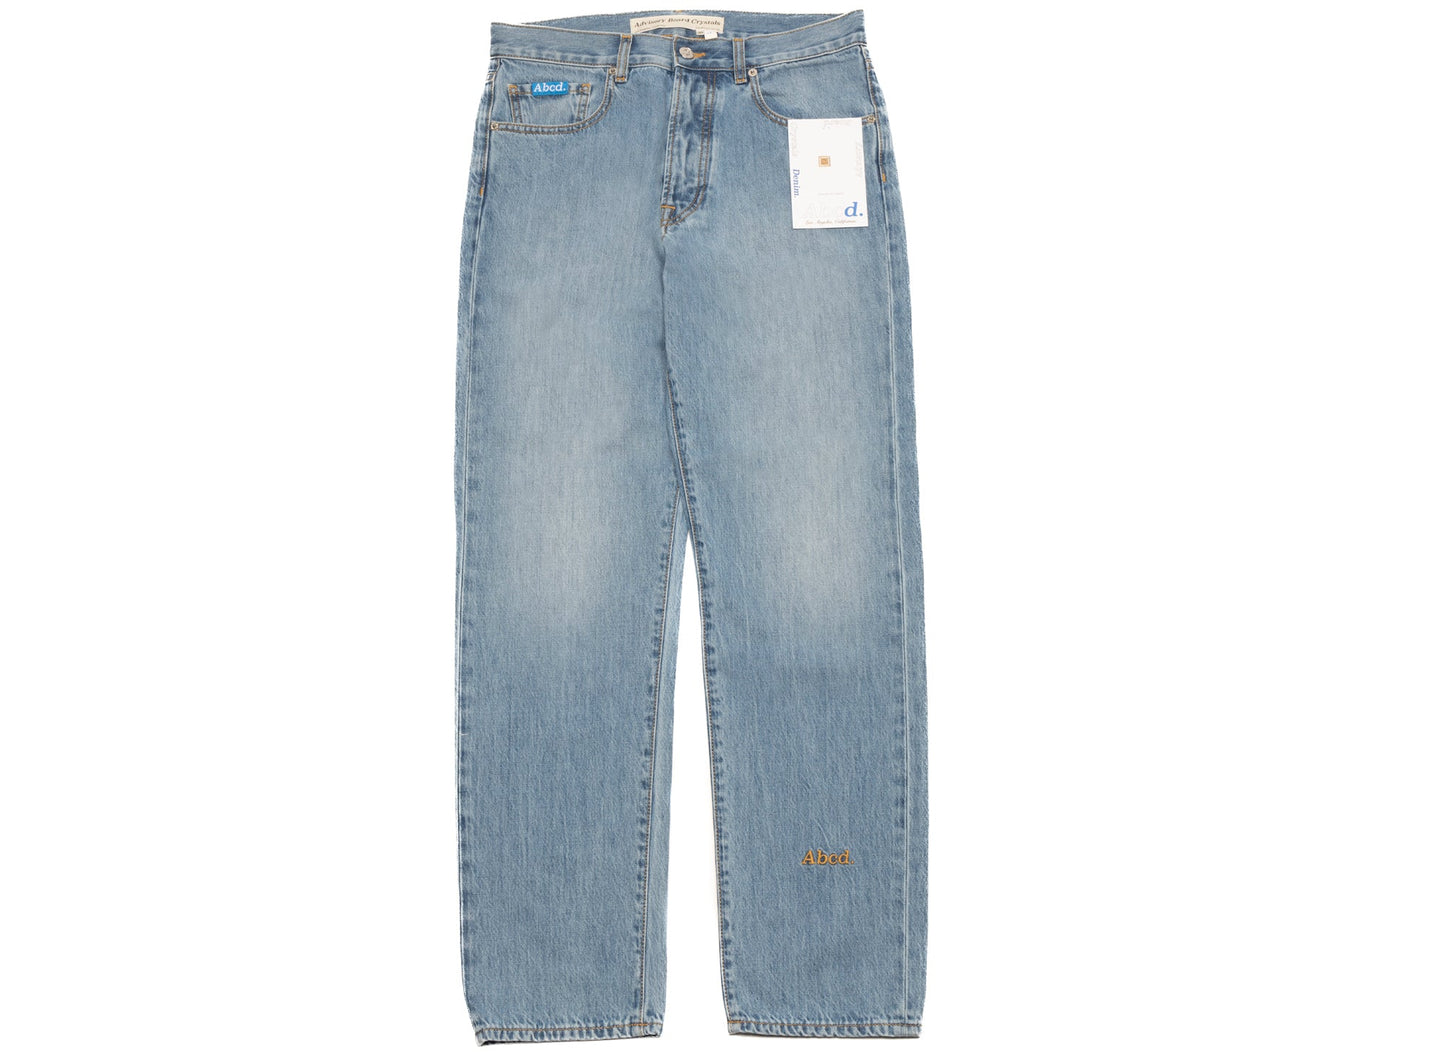 Advisory Board Crystals Abcd. Original Fit Jeans in Light Blue